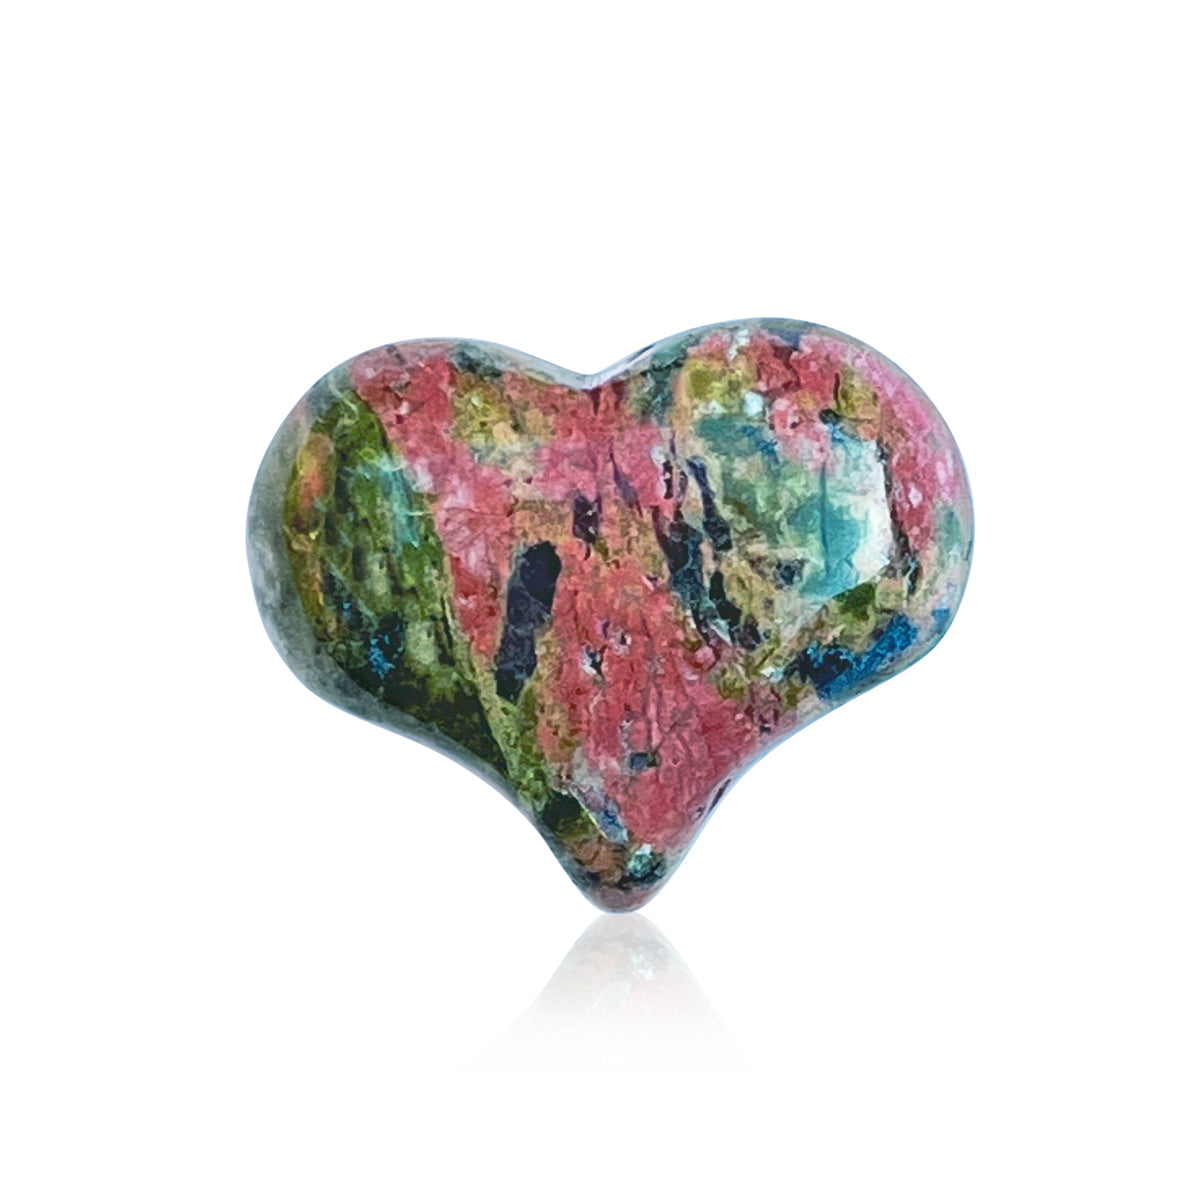 Unakite Heart Shaped Healing Gemstone for Harmonious Connections. This gemstone is said to provide you harmonious connections on a spiritual level. It's a healing stone, with the greens bringing soothing vitality and the pink bringing affection and empathy. 